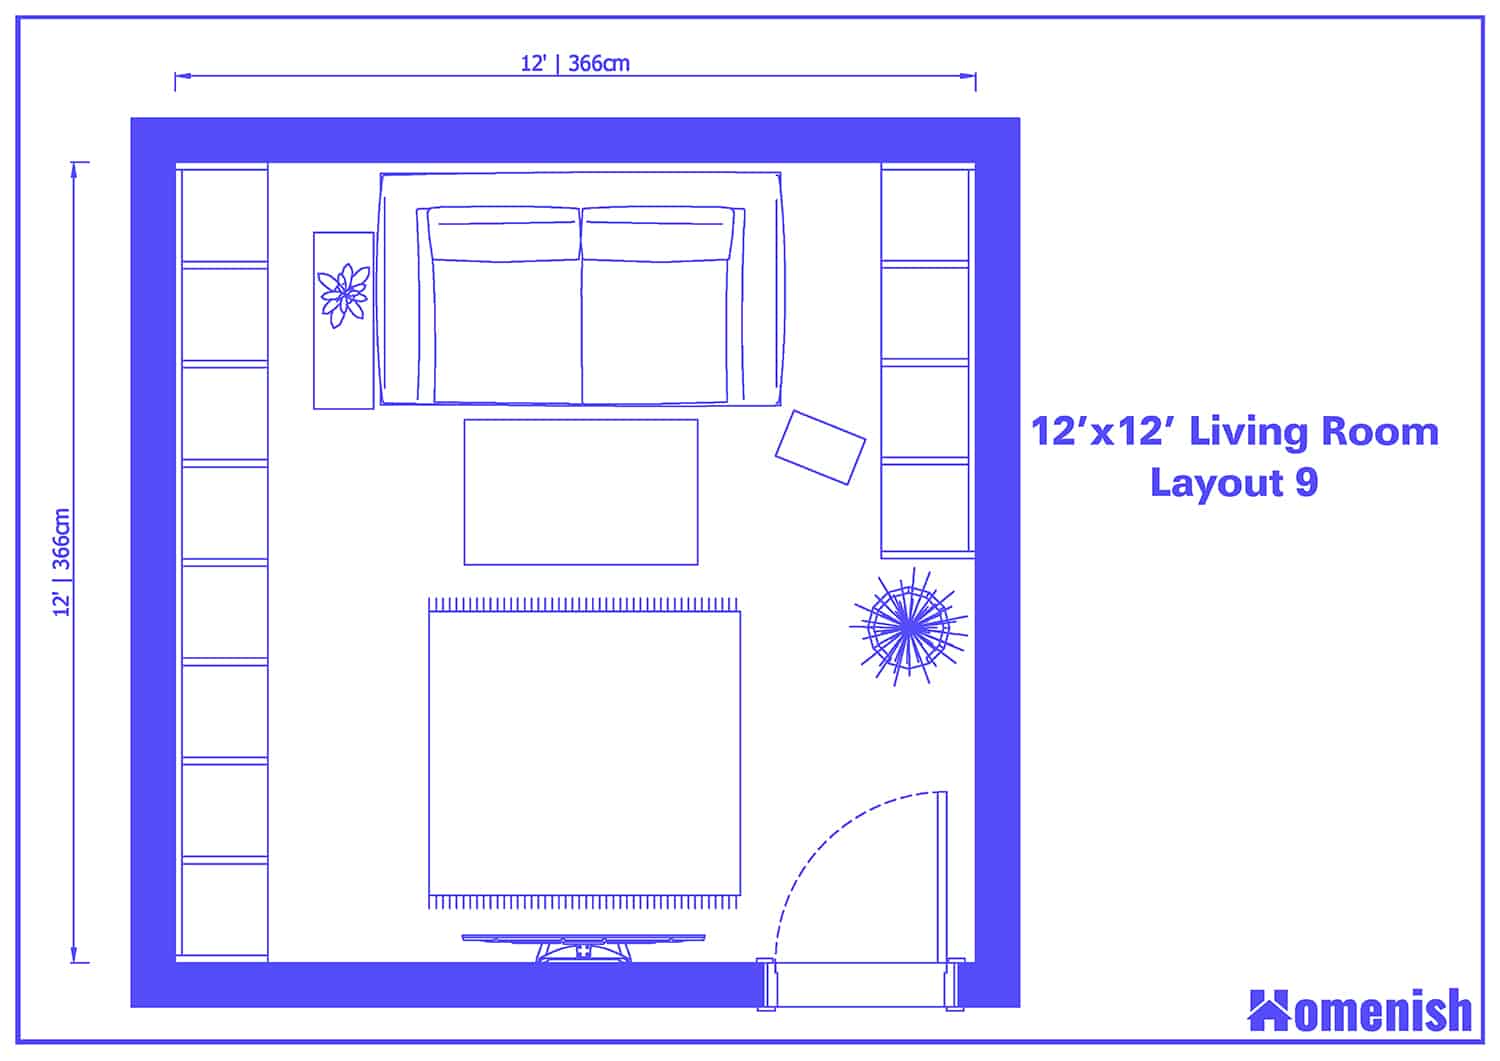 rules for living room layout